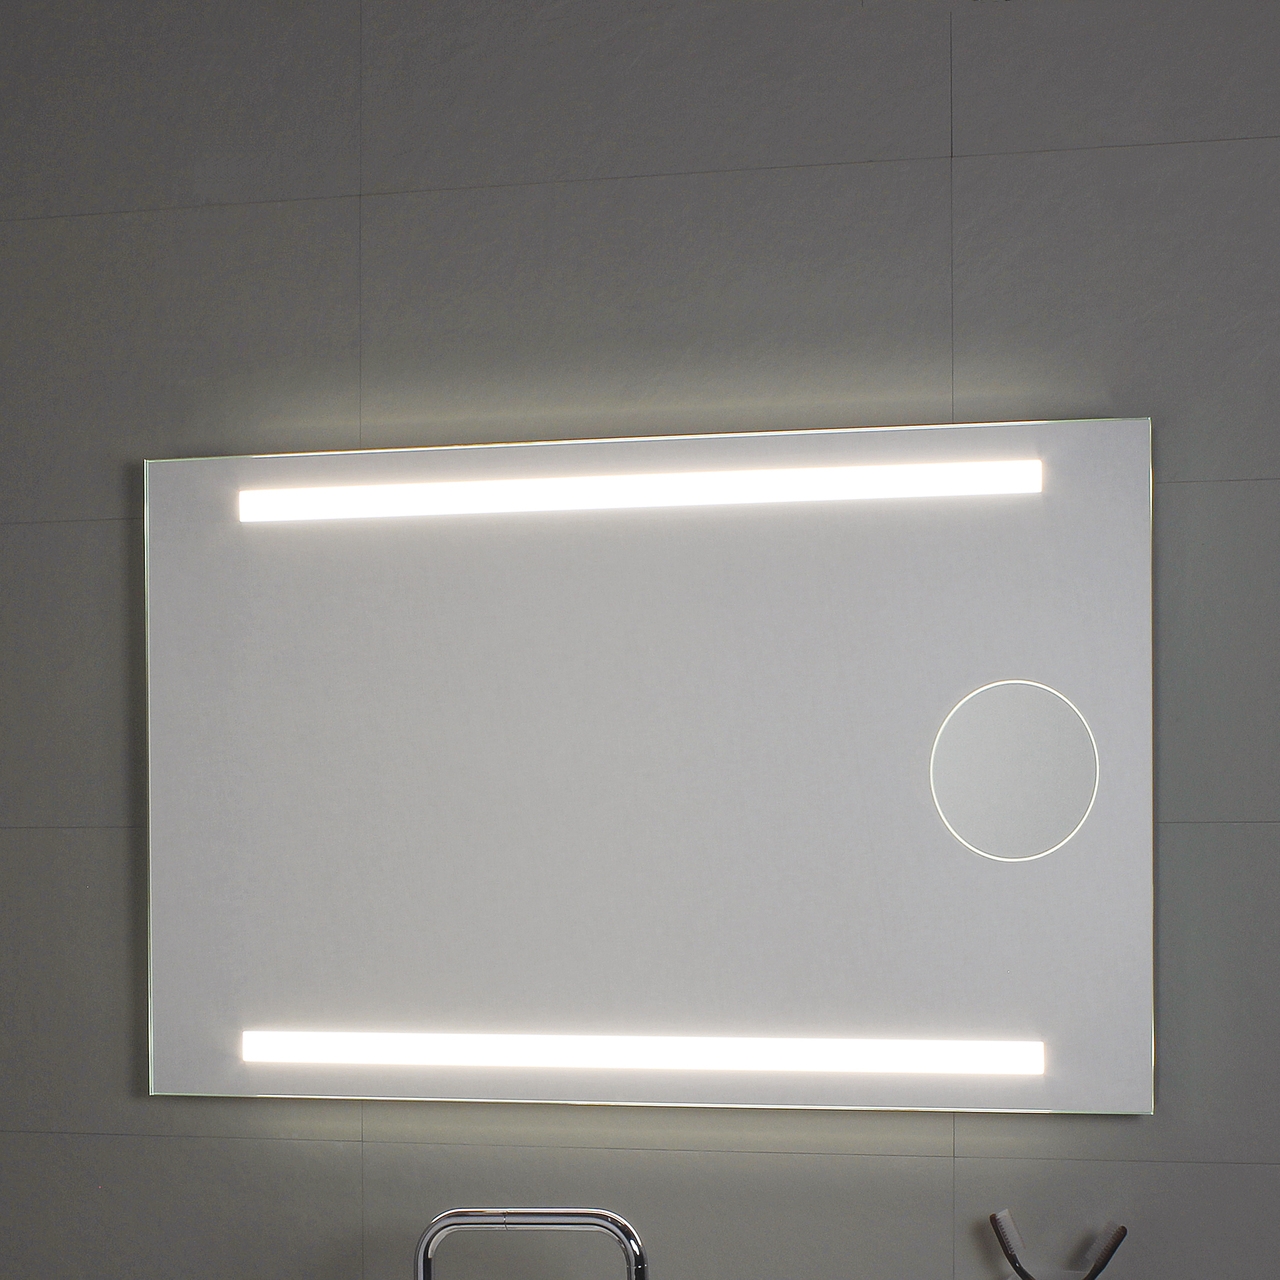 Okkio mirror with light and magnifying mirror